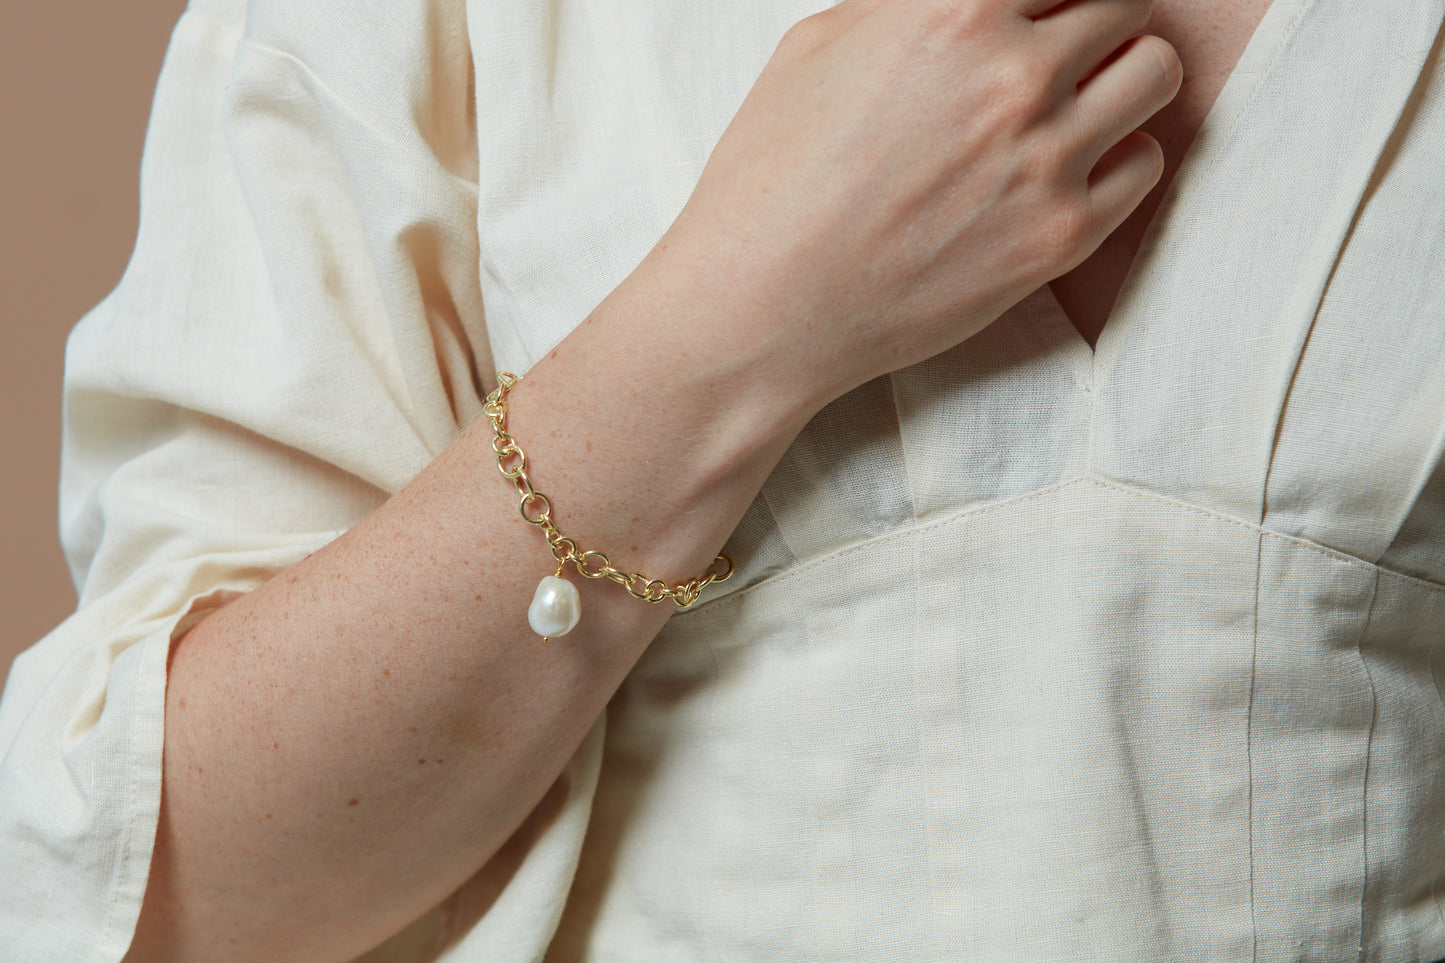 Decus baroque cultured freshwater pearl drop on chunky gold chain bracelet